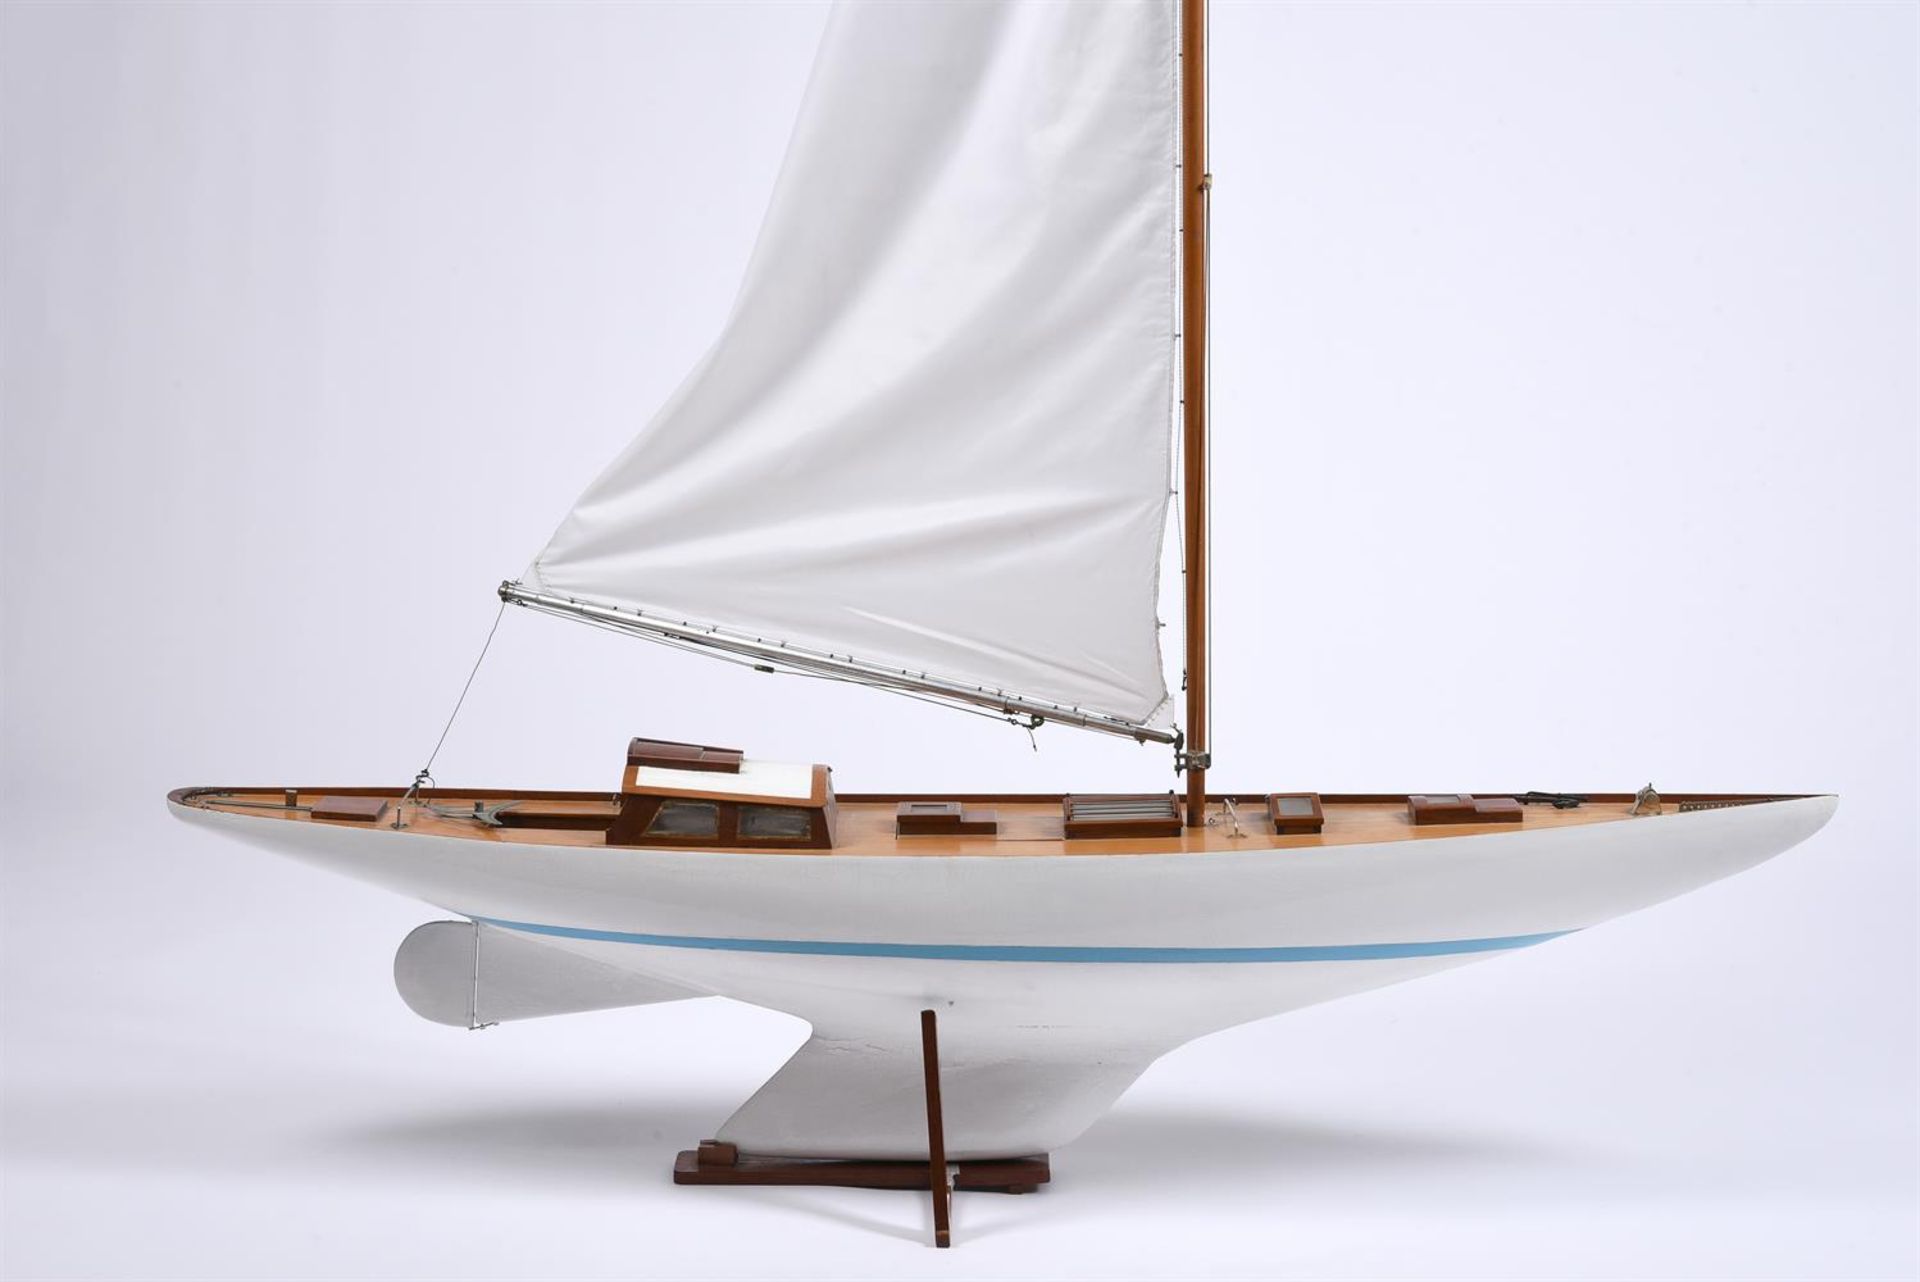 A MODERN PAINTED AND VARNISHED WOOD MODEL OF A POND YACHTThe mast and sail above the white hull and - Image 2 of 5